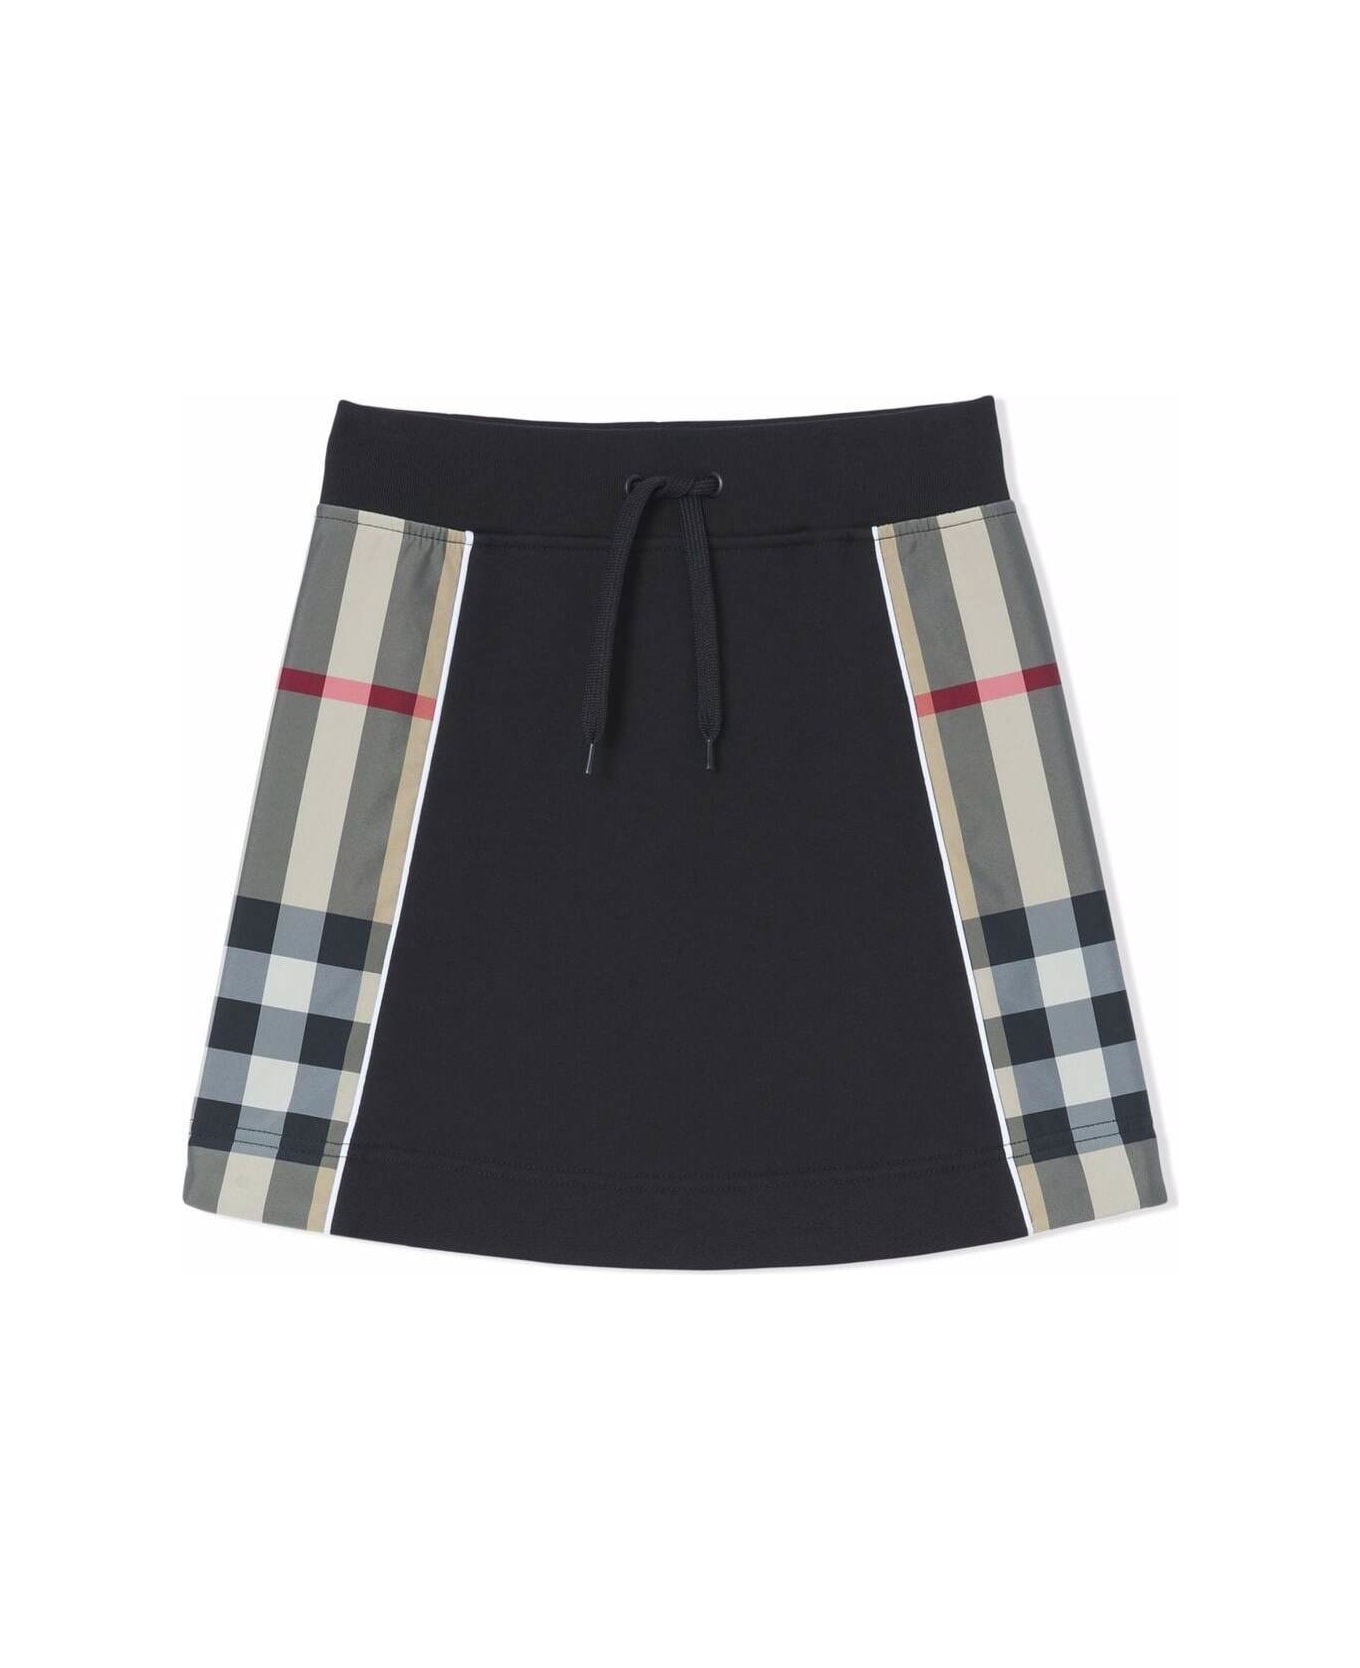 Burberry Black Cotton Skirt With Vintage Check Inserts - Black